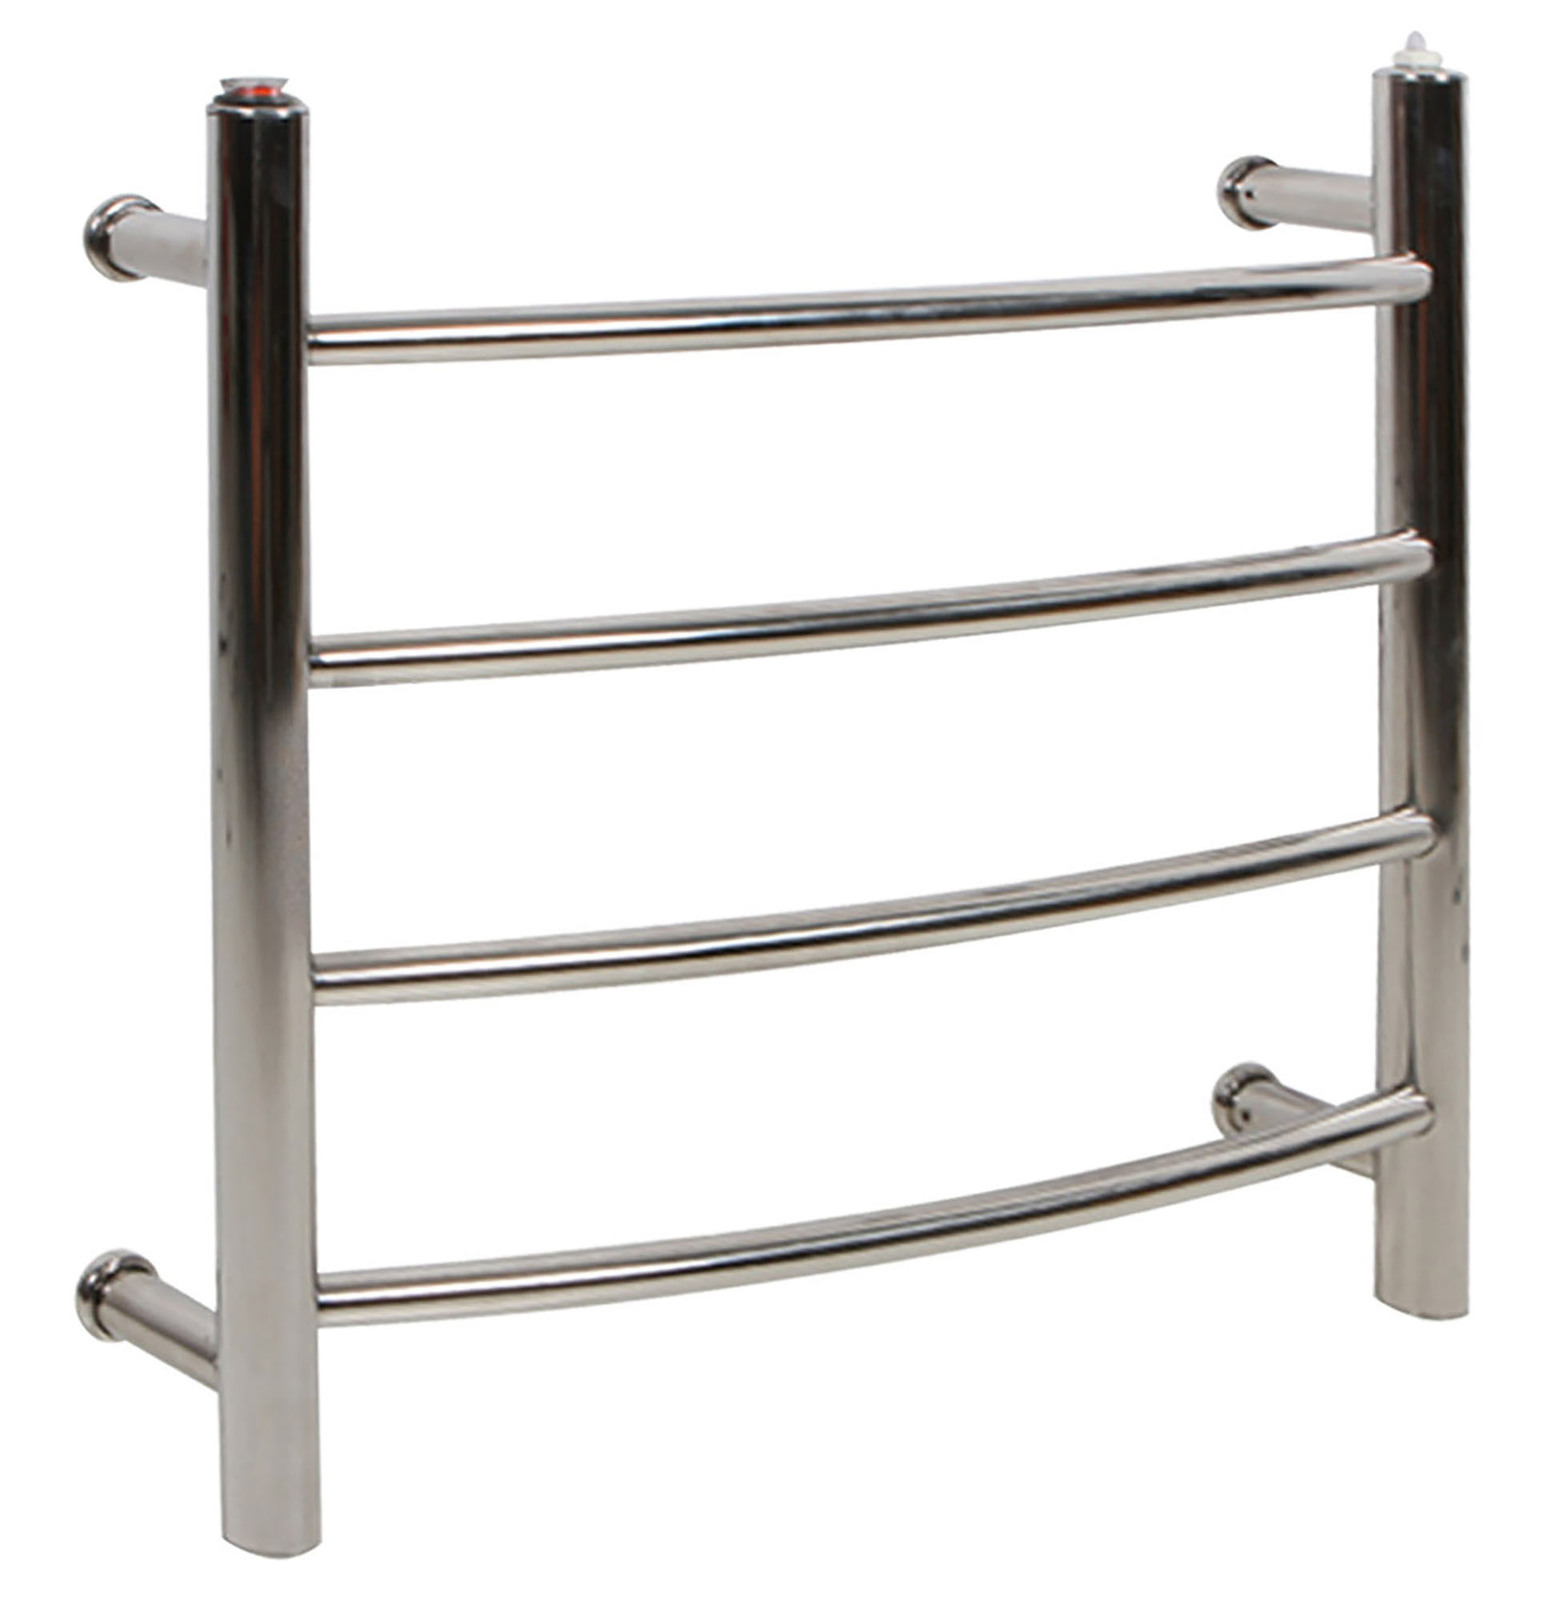 4 RING ELECTRIC HEATED S/S TOWEL RACK 220-240V MOUNTED